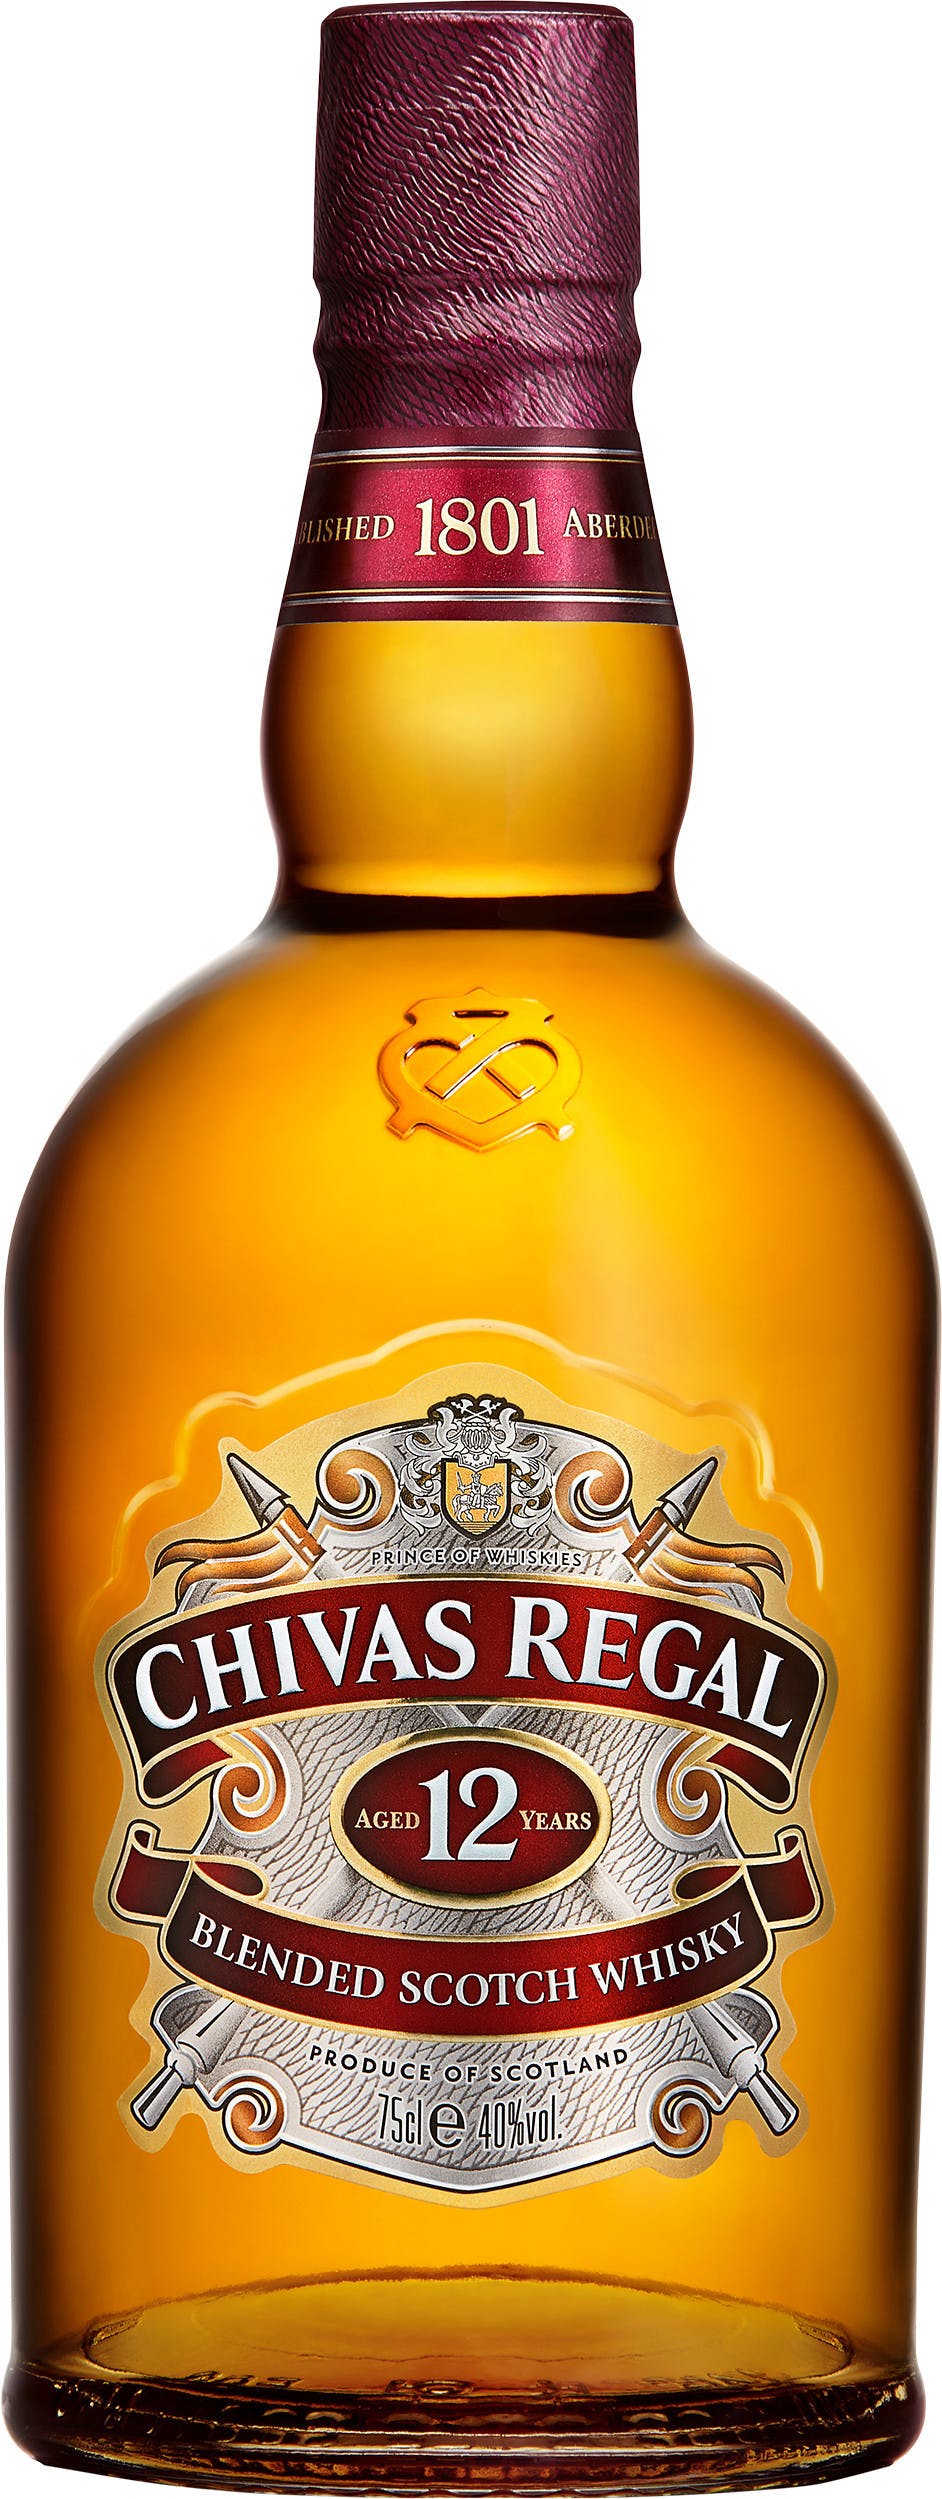 Whisky Liquors Regal year Discount Garden Blended old Scotch 12 Chivas - State 750ml